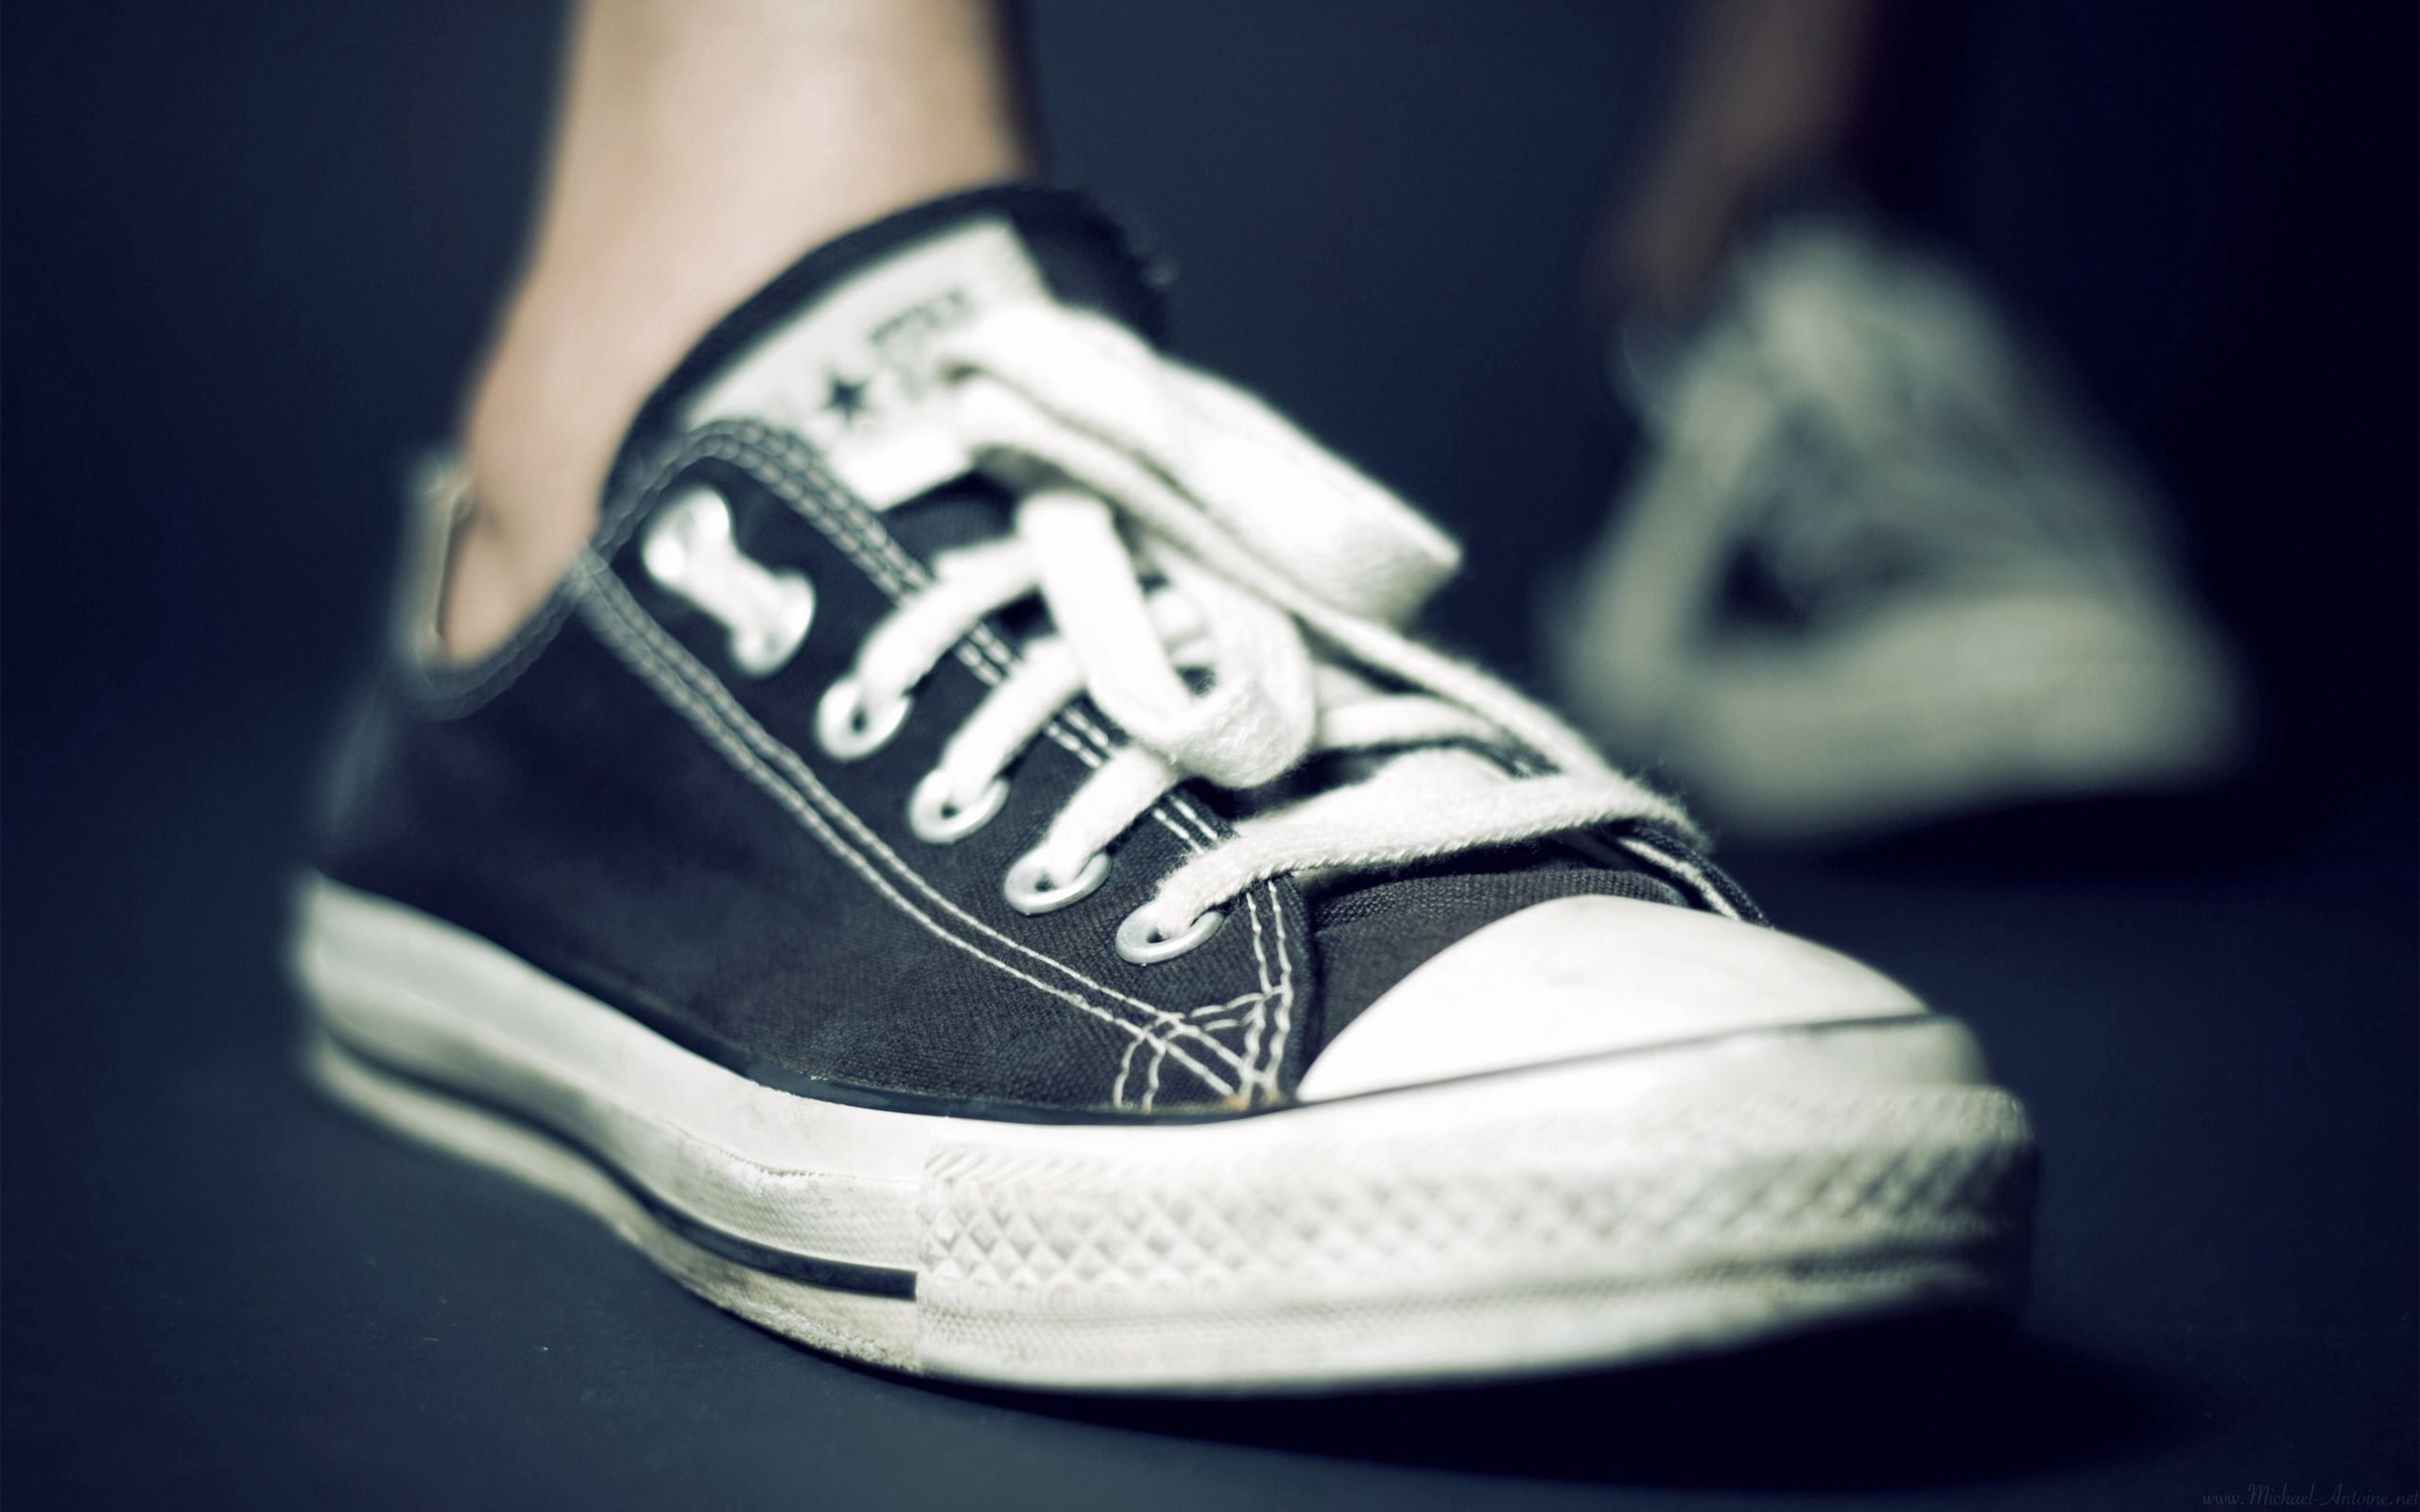 sports, miscellanea, miscellaneous, sneakers, shoes, footwear, laces, shoelaces Free Stock Photo